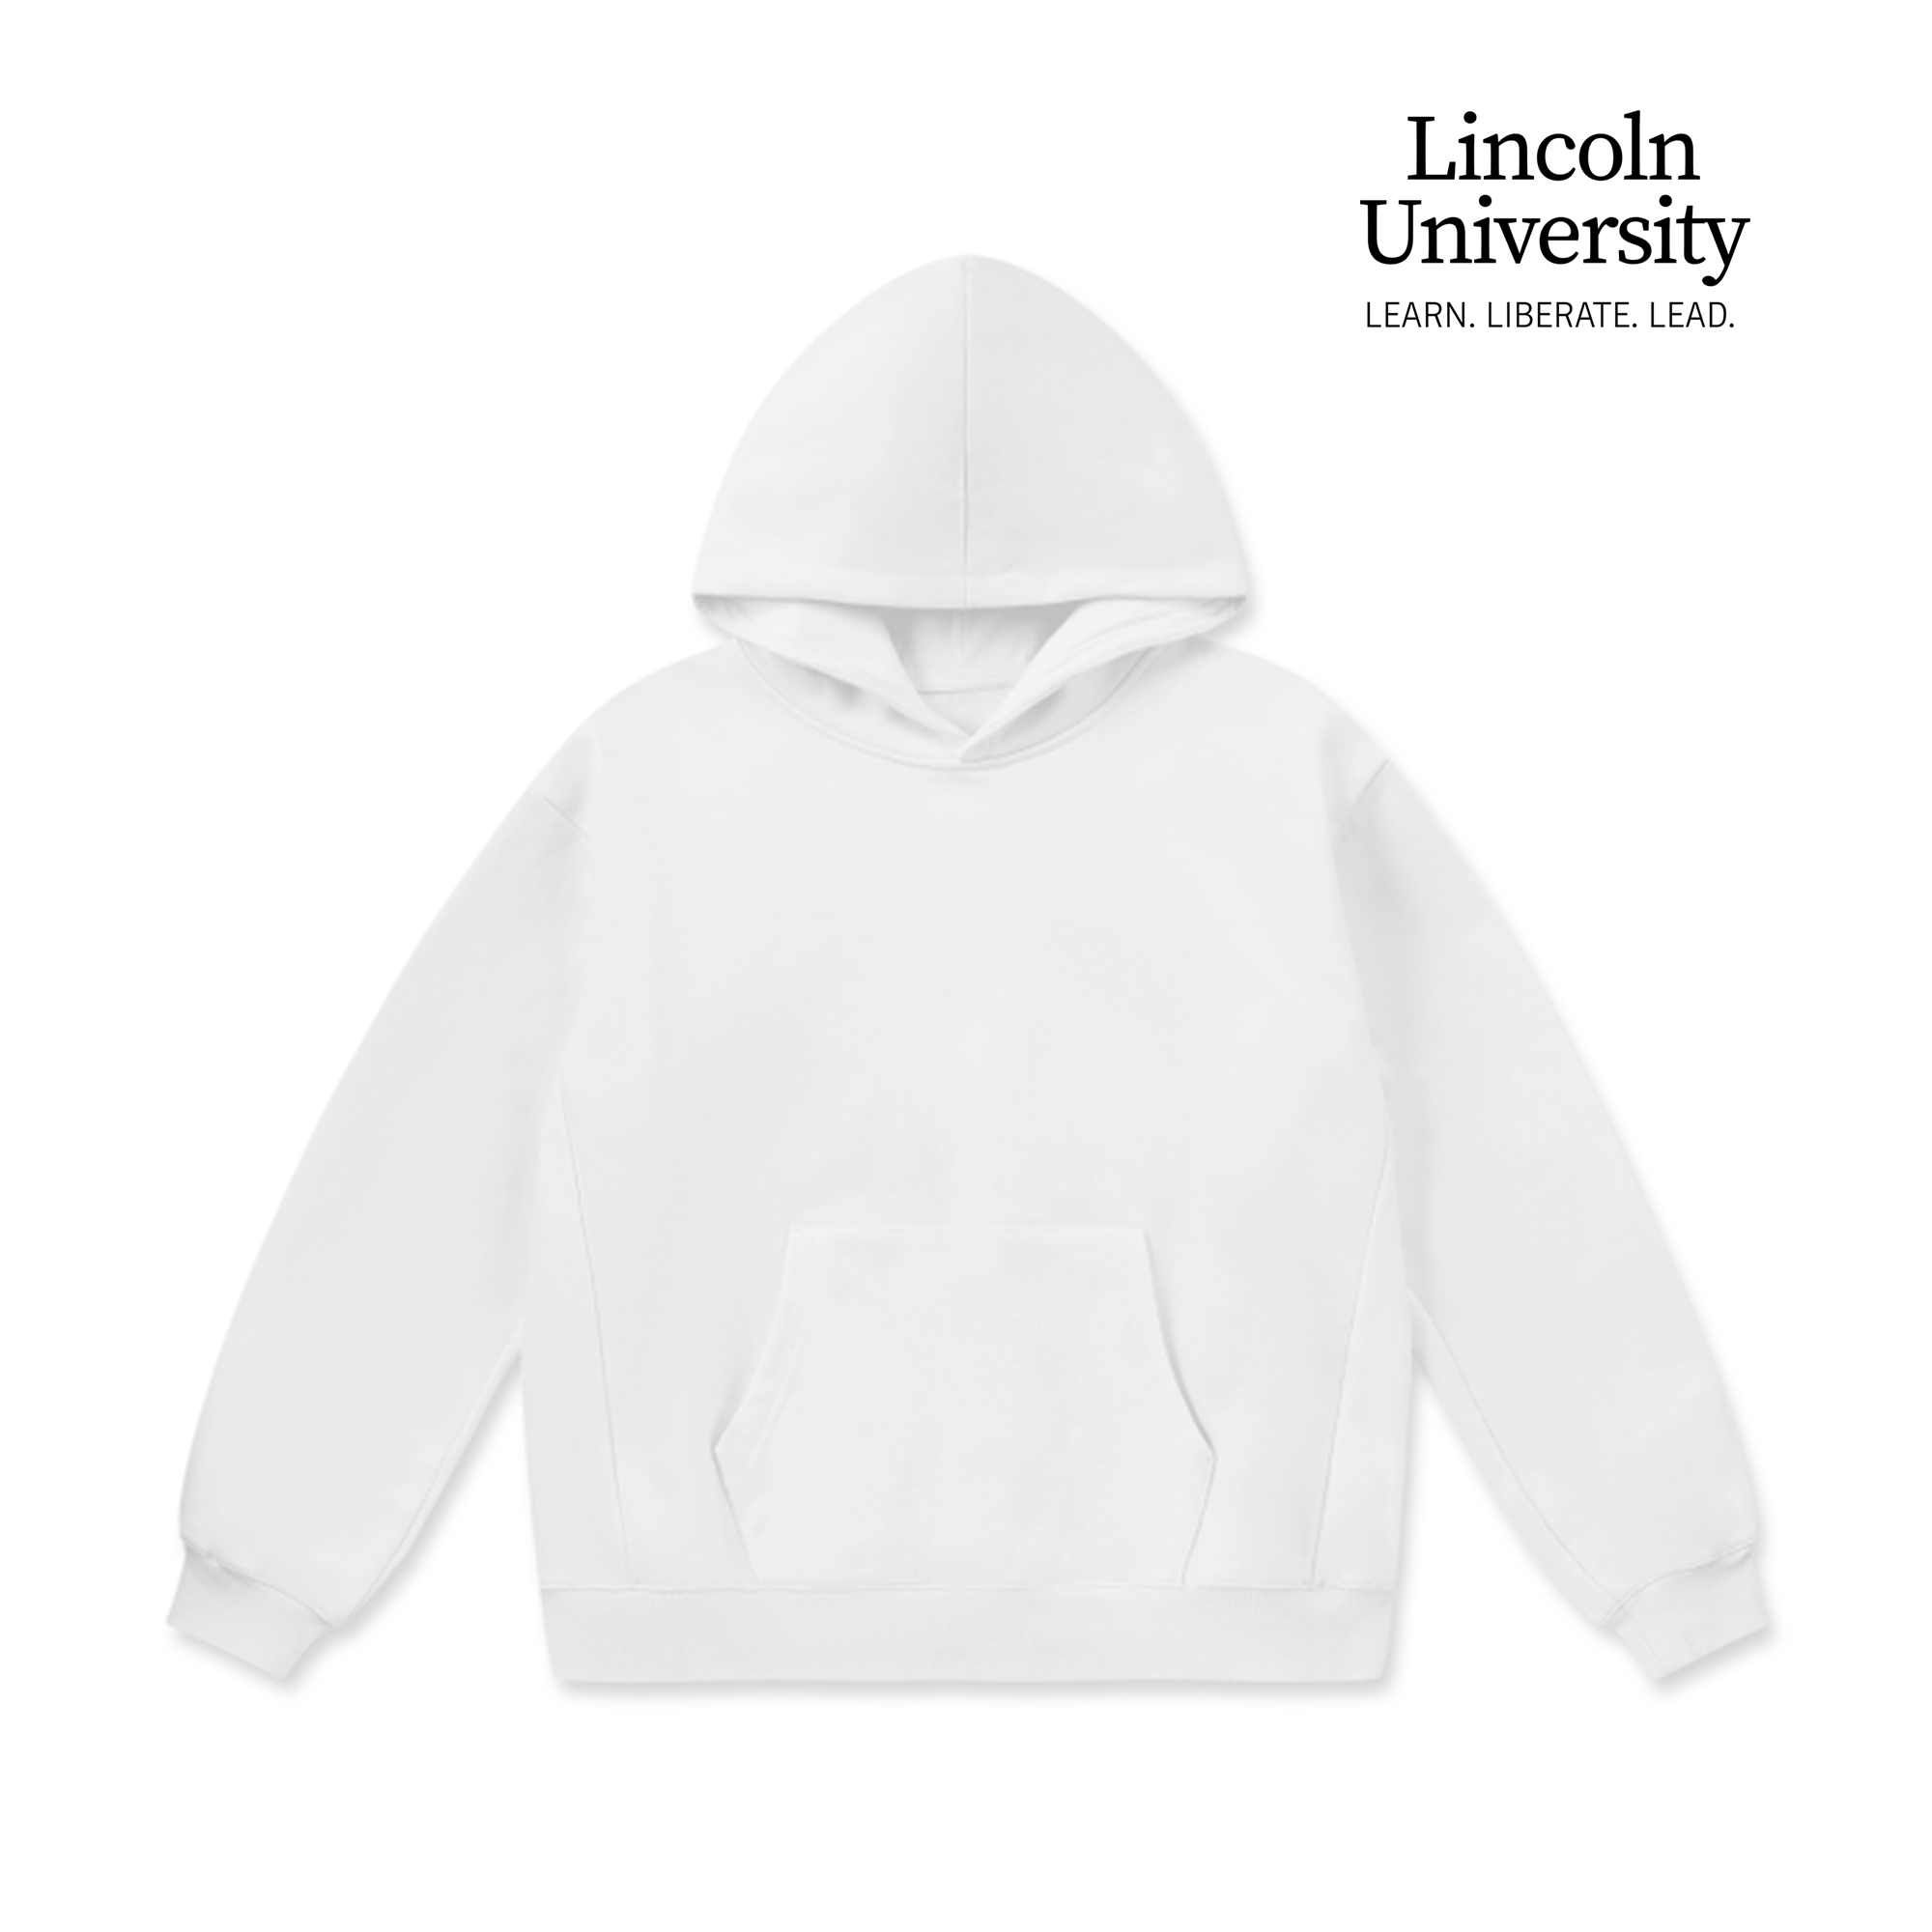 LCC Super Weighted Hoodie - Lincoln University (Modern Ver.1)